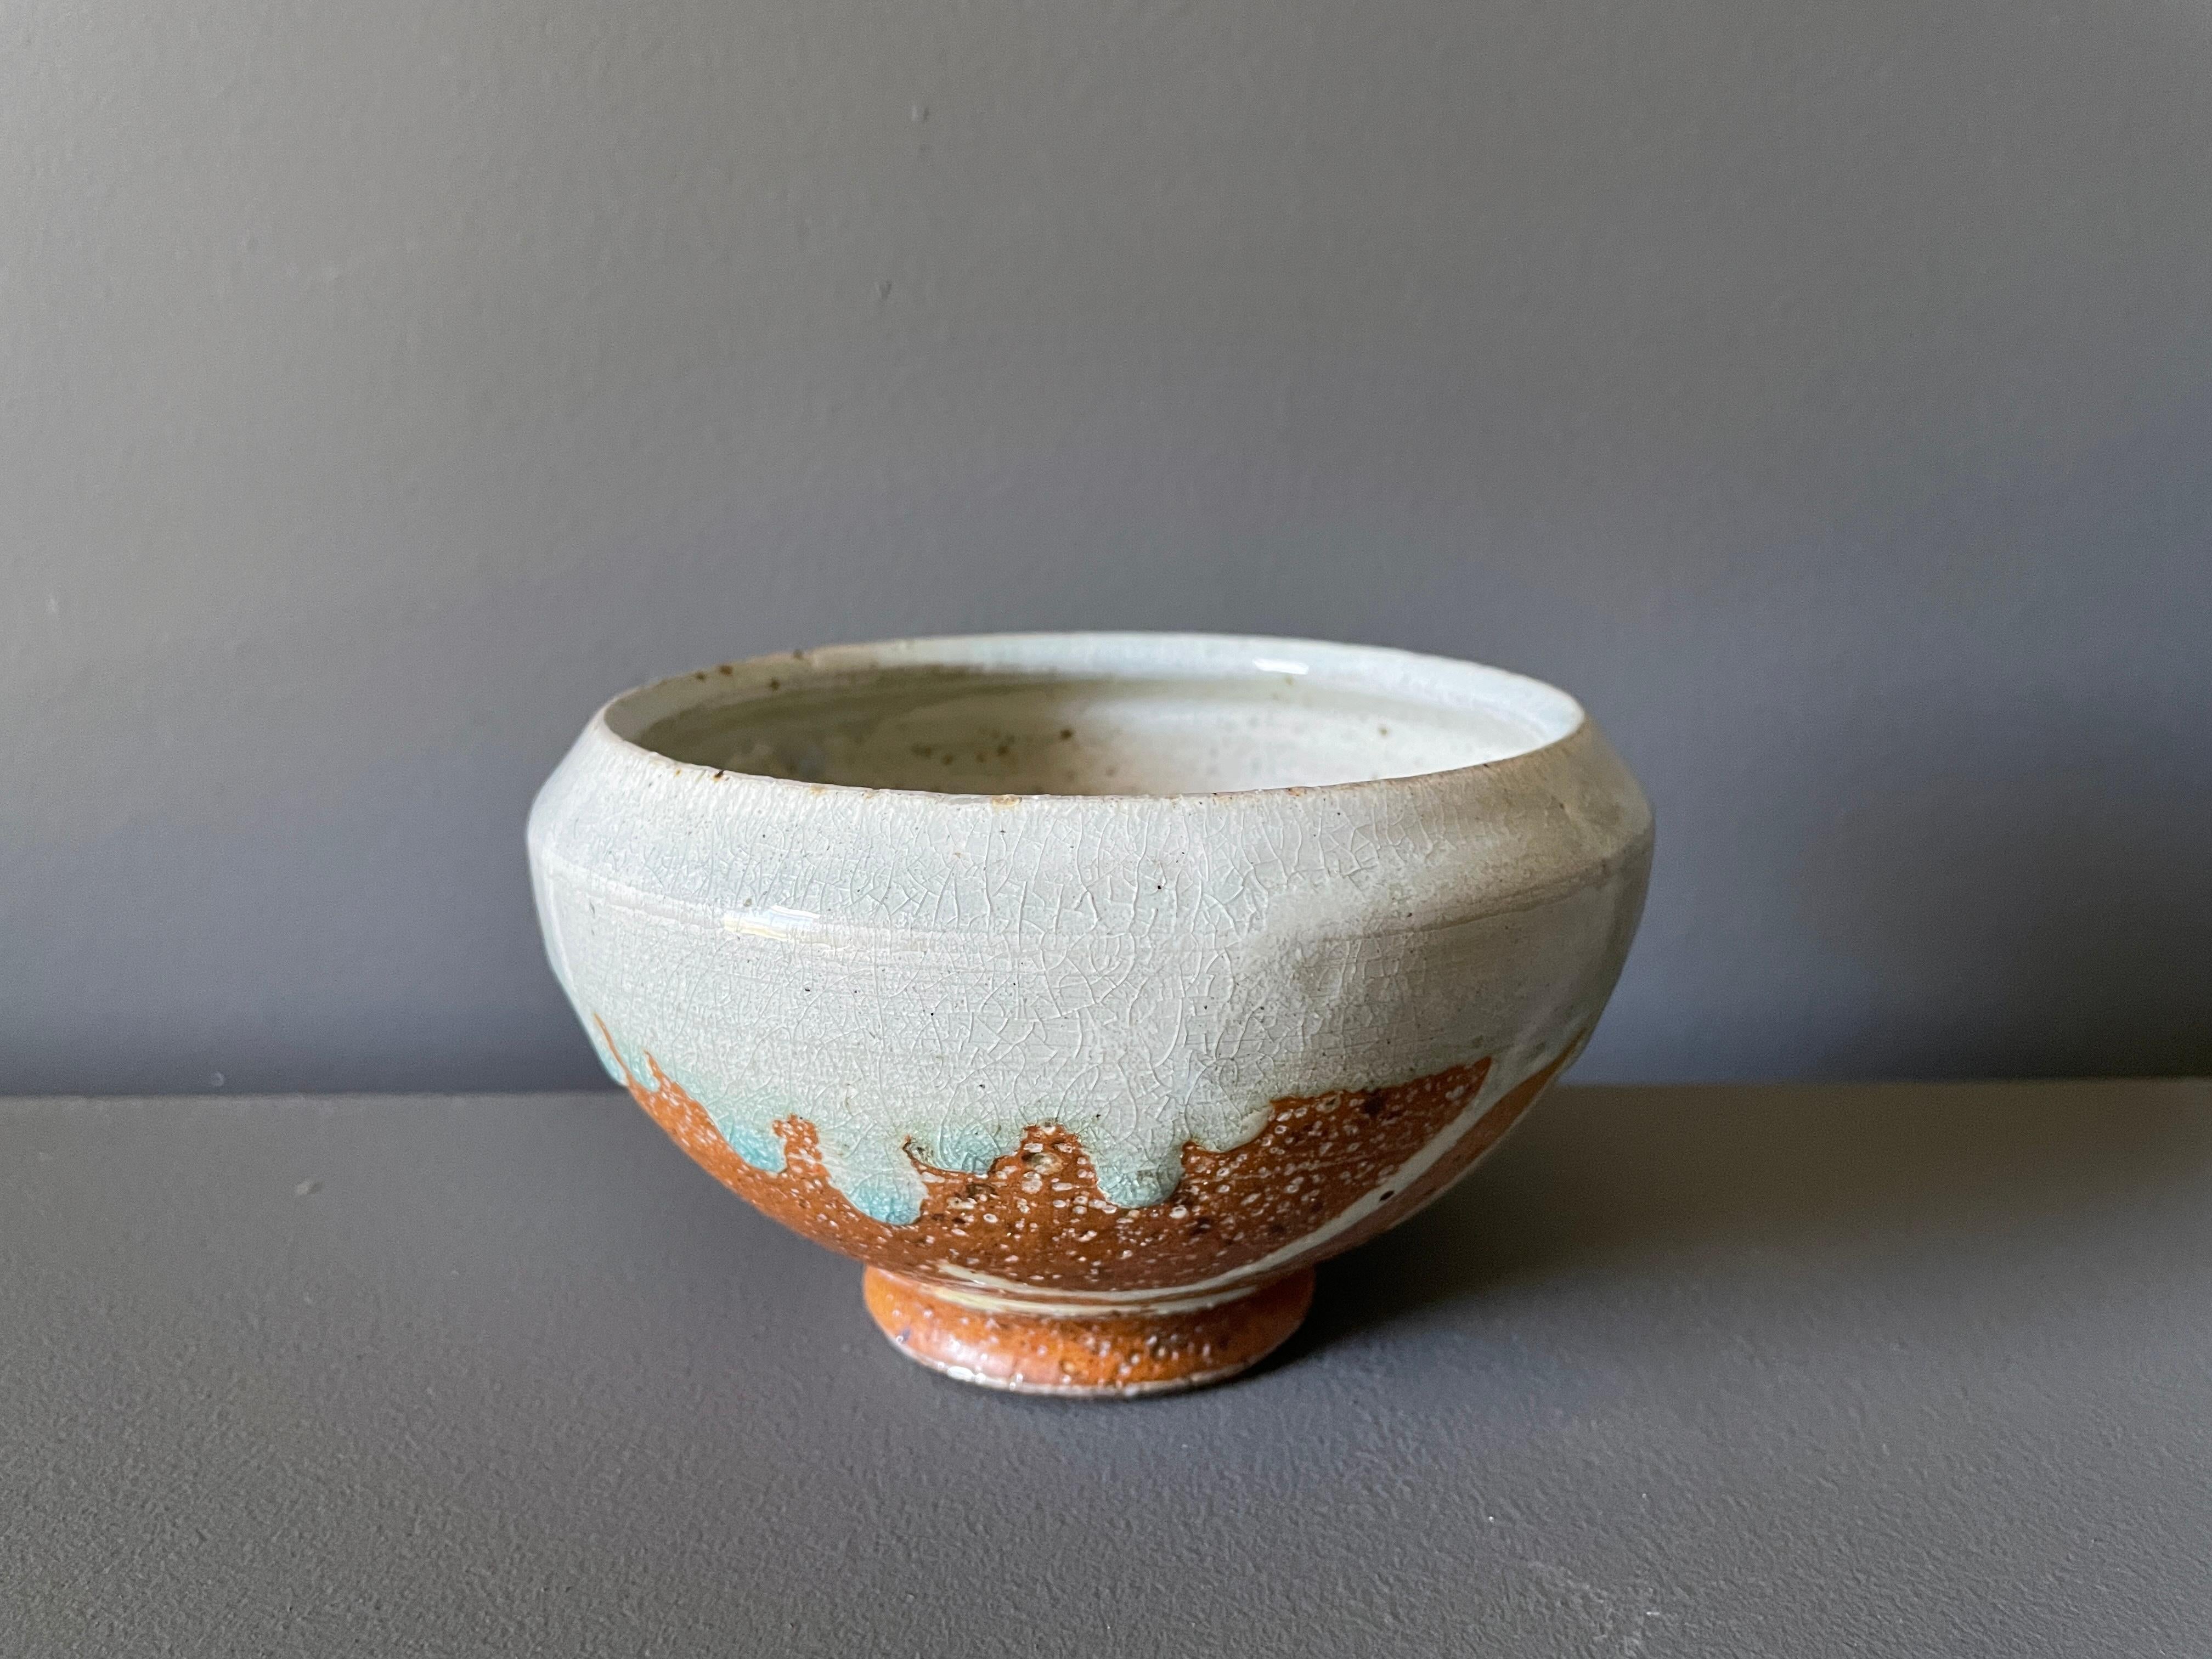 Vintage studio crafted pottery, circa 1960s. Beautiful glazing and composition.